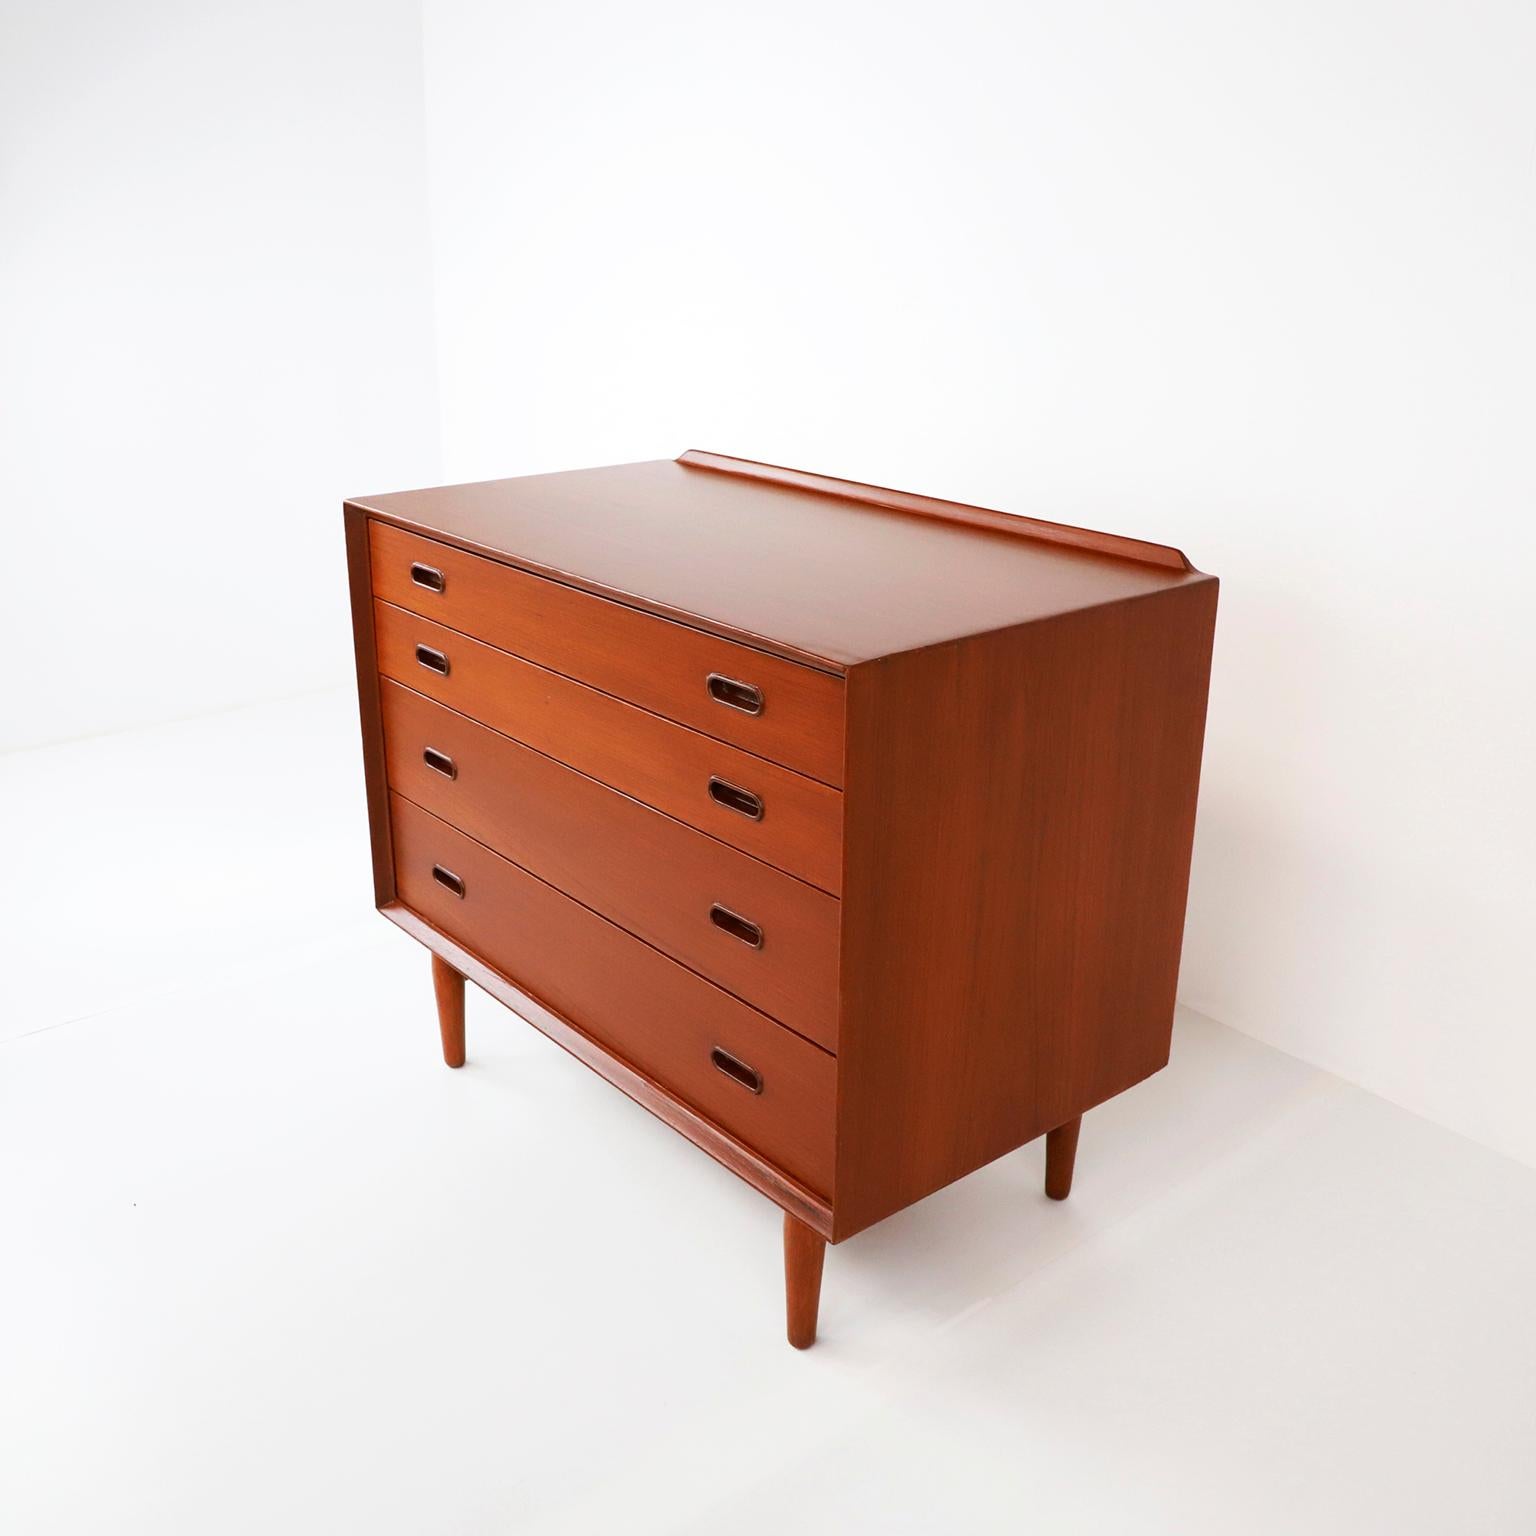 Circa 1960 We offer this Arne Vodder teak chest for Sibast Møbelfabrik is in very good condition. The chest has been recently professional restored.